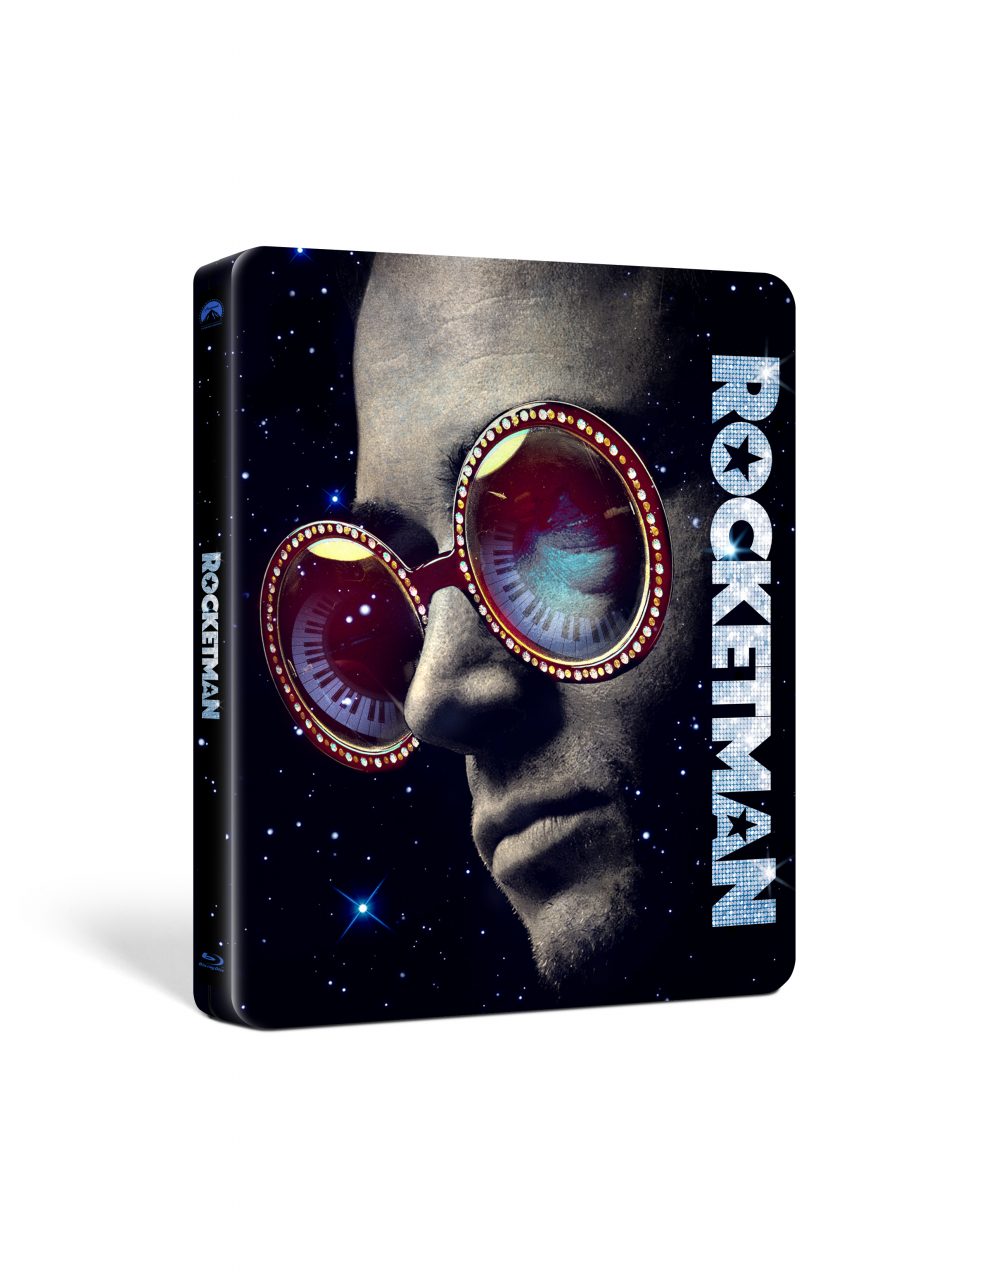 Rocketman Best Buy Limited Edition Steelbook 4K Ultra HD Combo Pack (Paramount Home Entertainment)